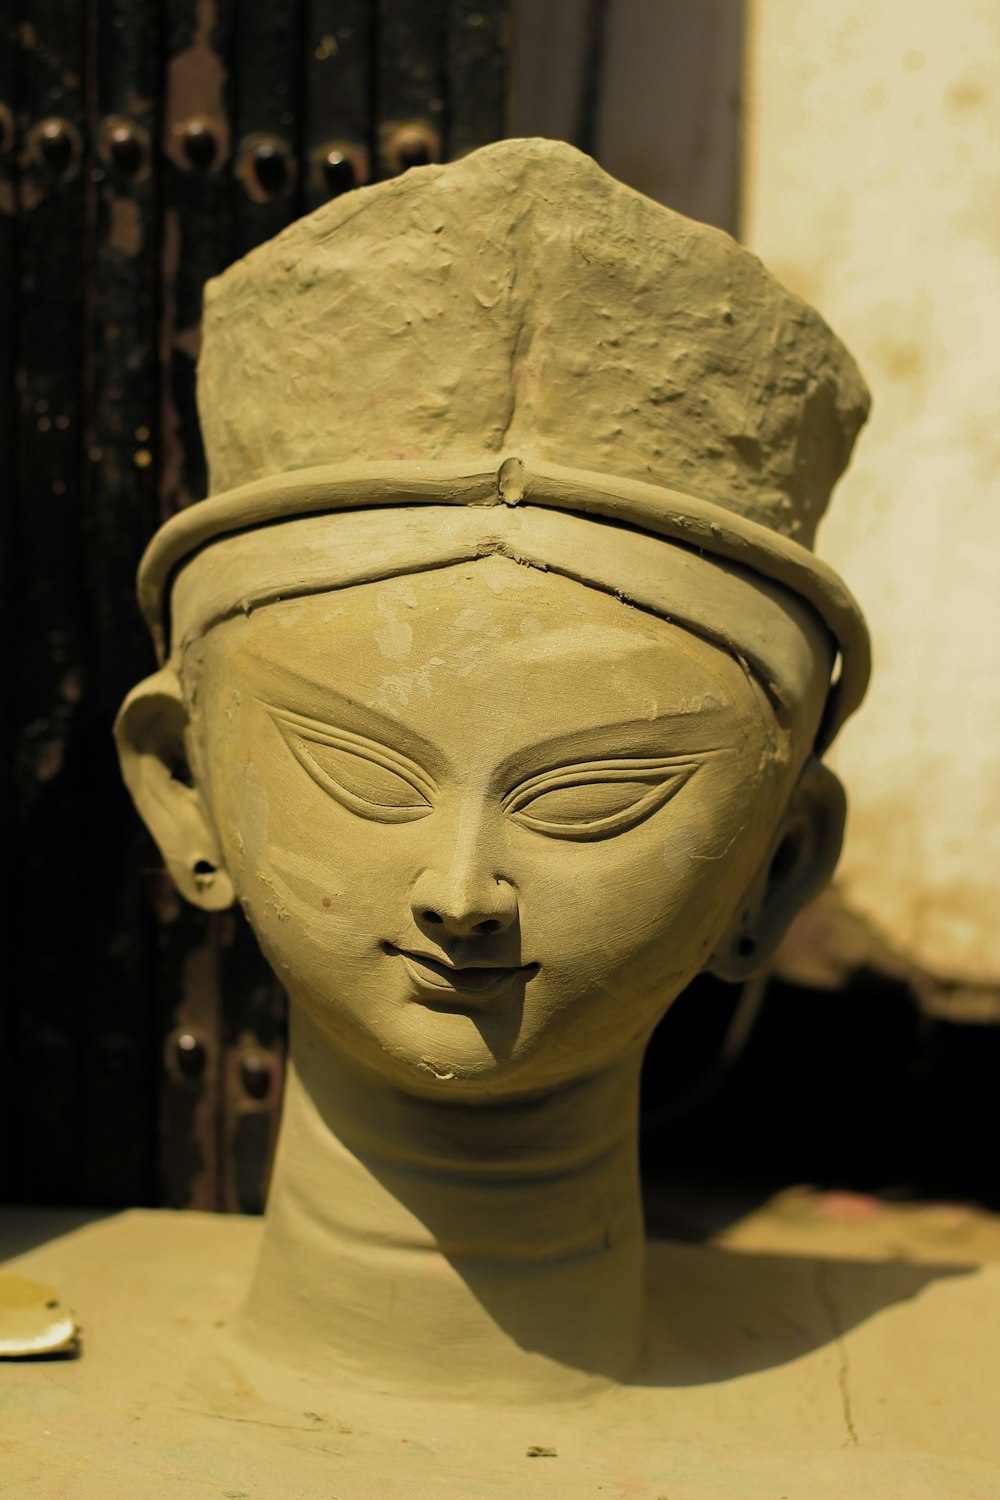 a clay sculpture of a woman's head wearing a hat